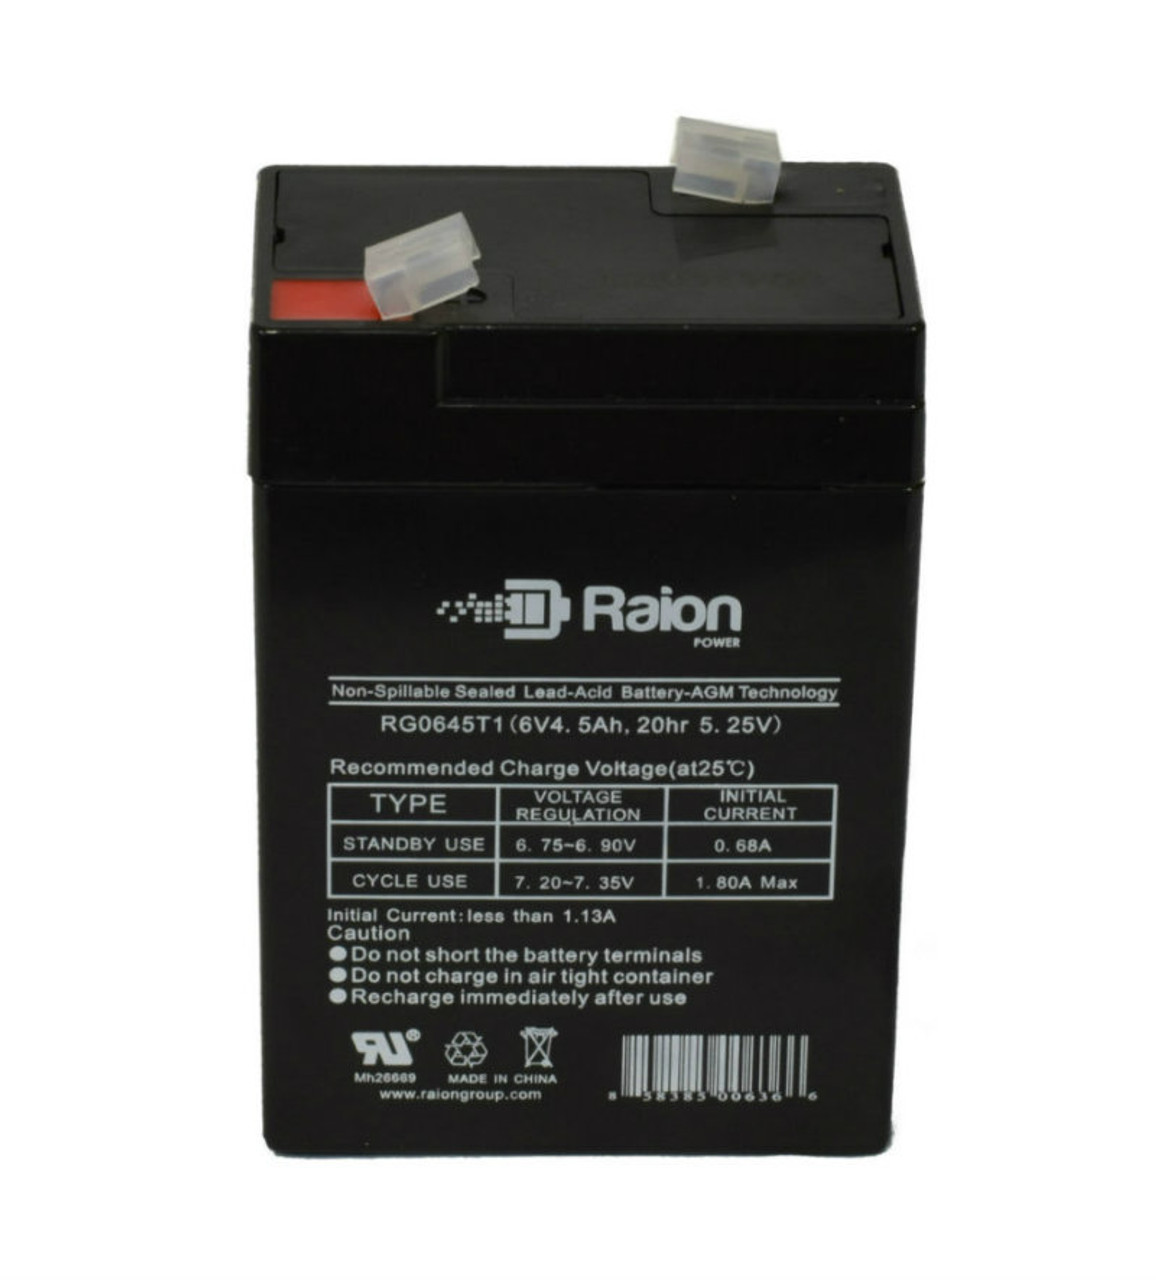 Raion Power RG0645T1 Replacement Battery Cartridge for FIAMM FG10501